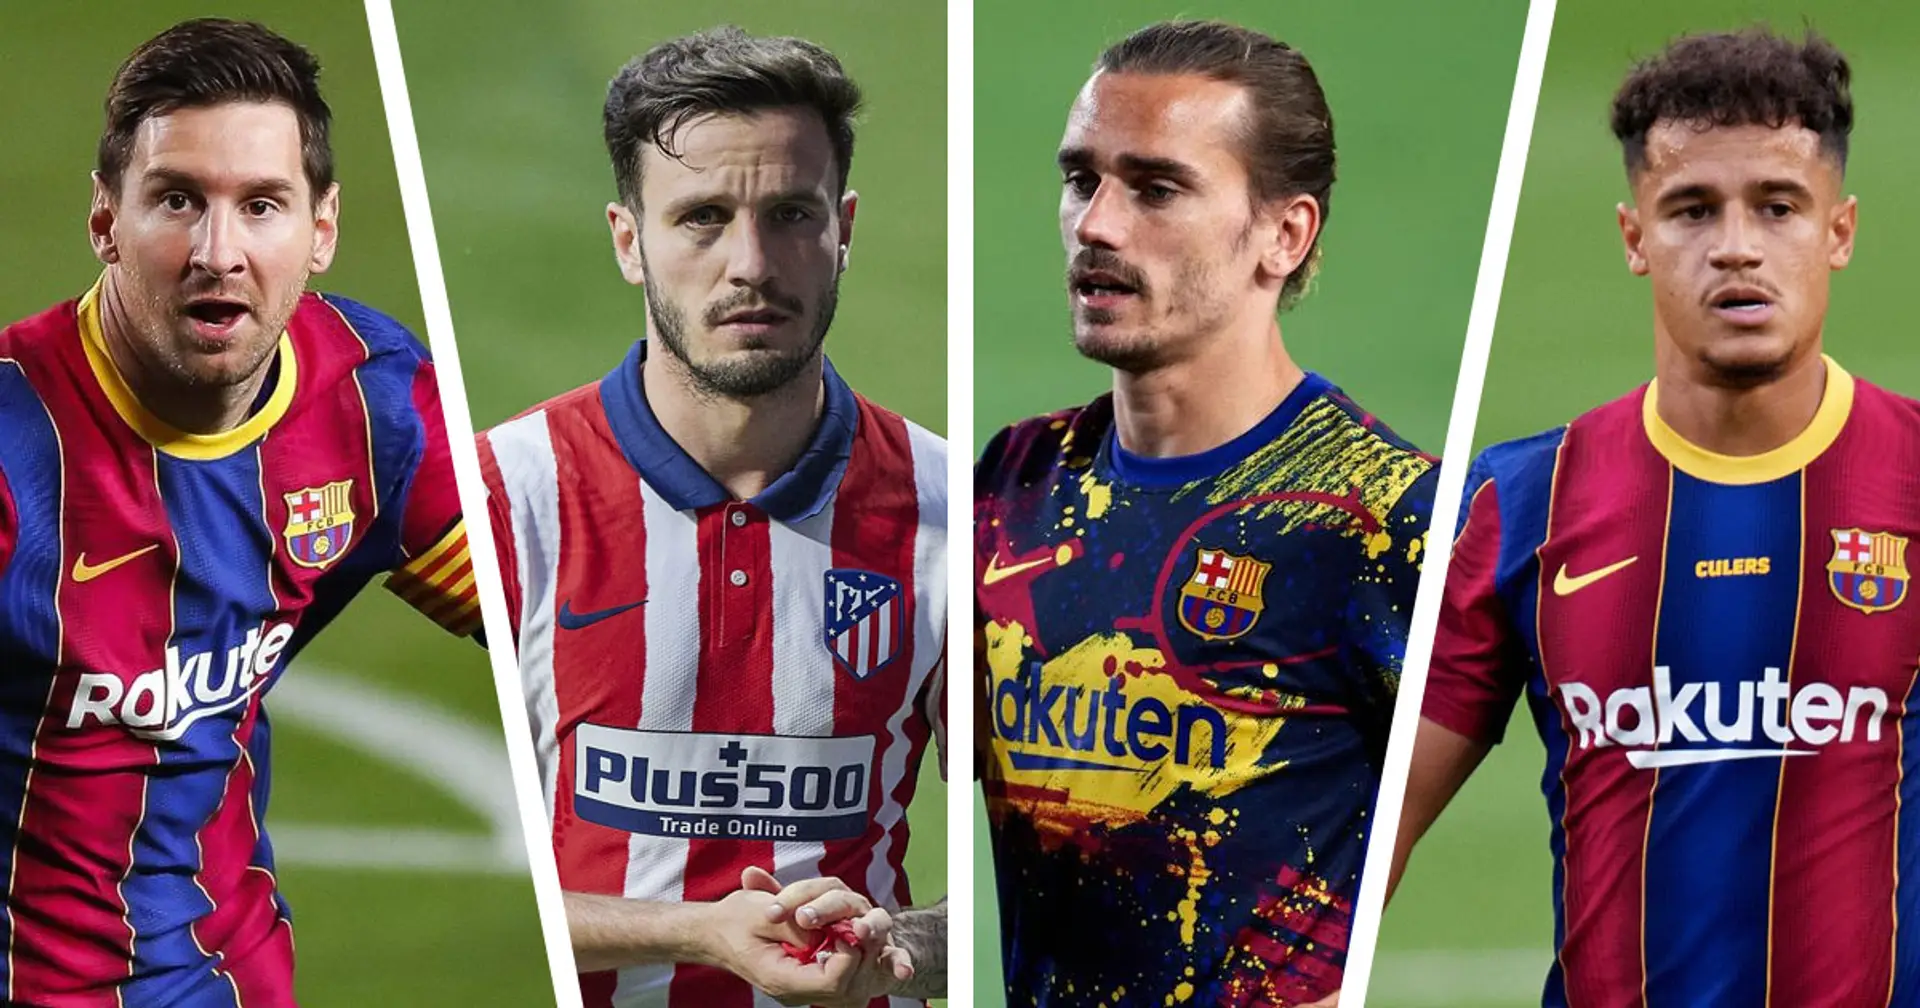 Griezmann-Saul swap update & more: 10 names in Barca's transfer round-up with probability ratings